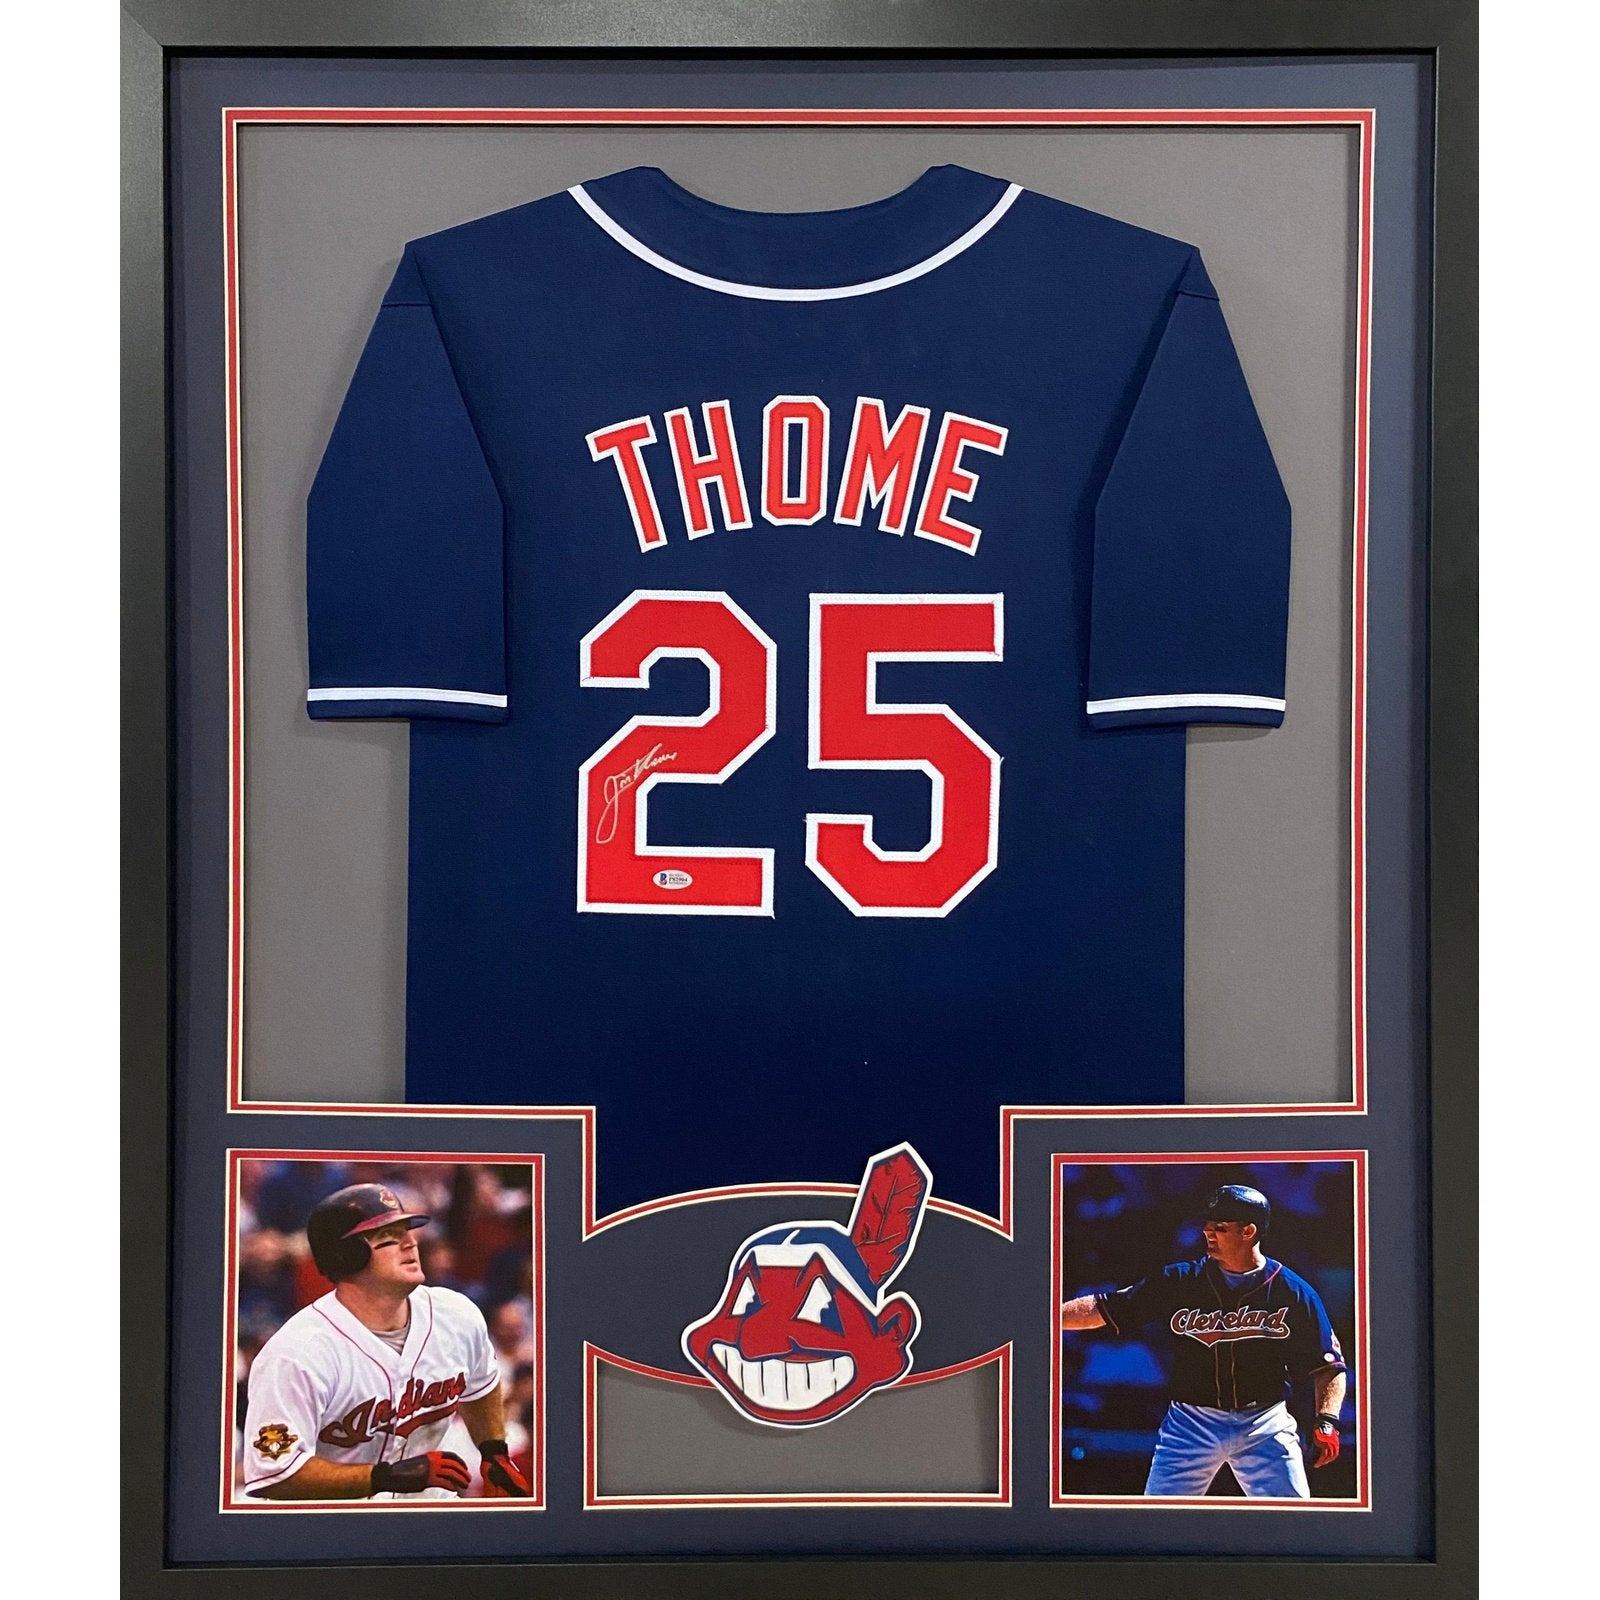 Jim Thome Framed Signed Cleveland Indians Jersey Beckett Autographed